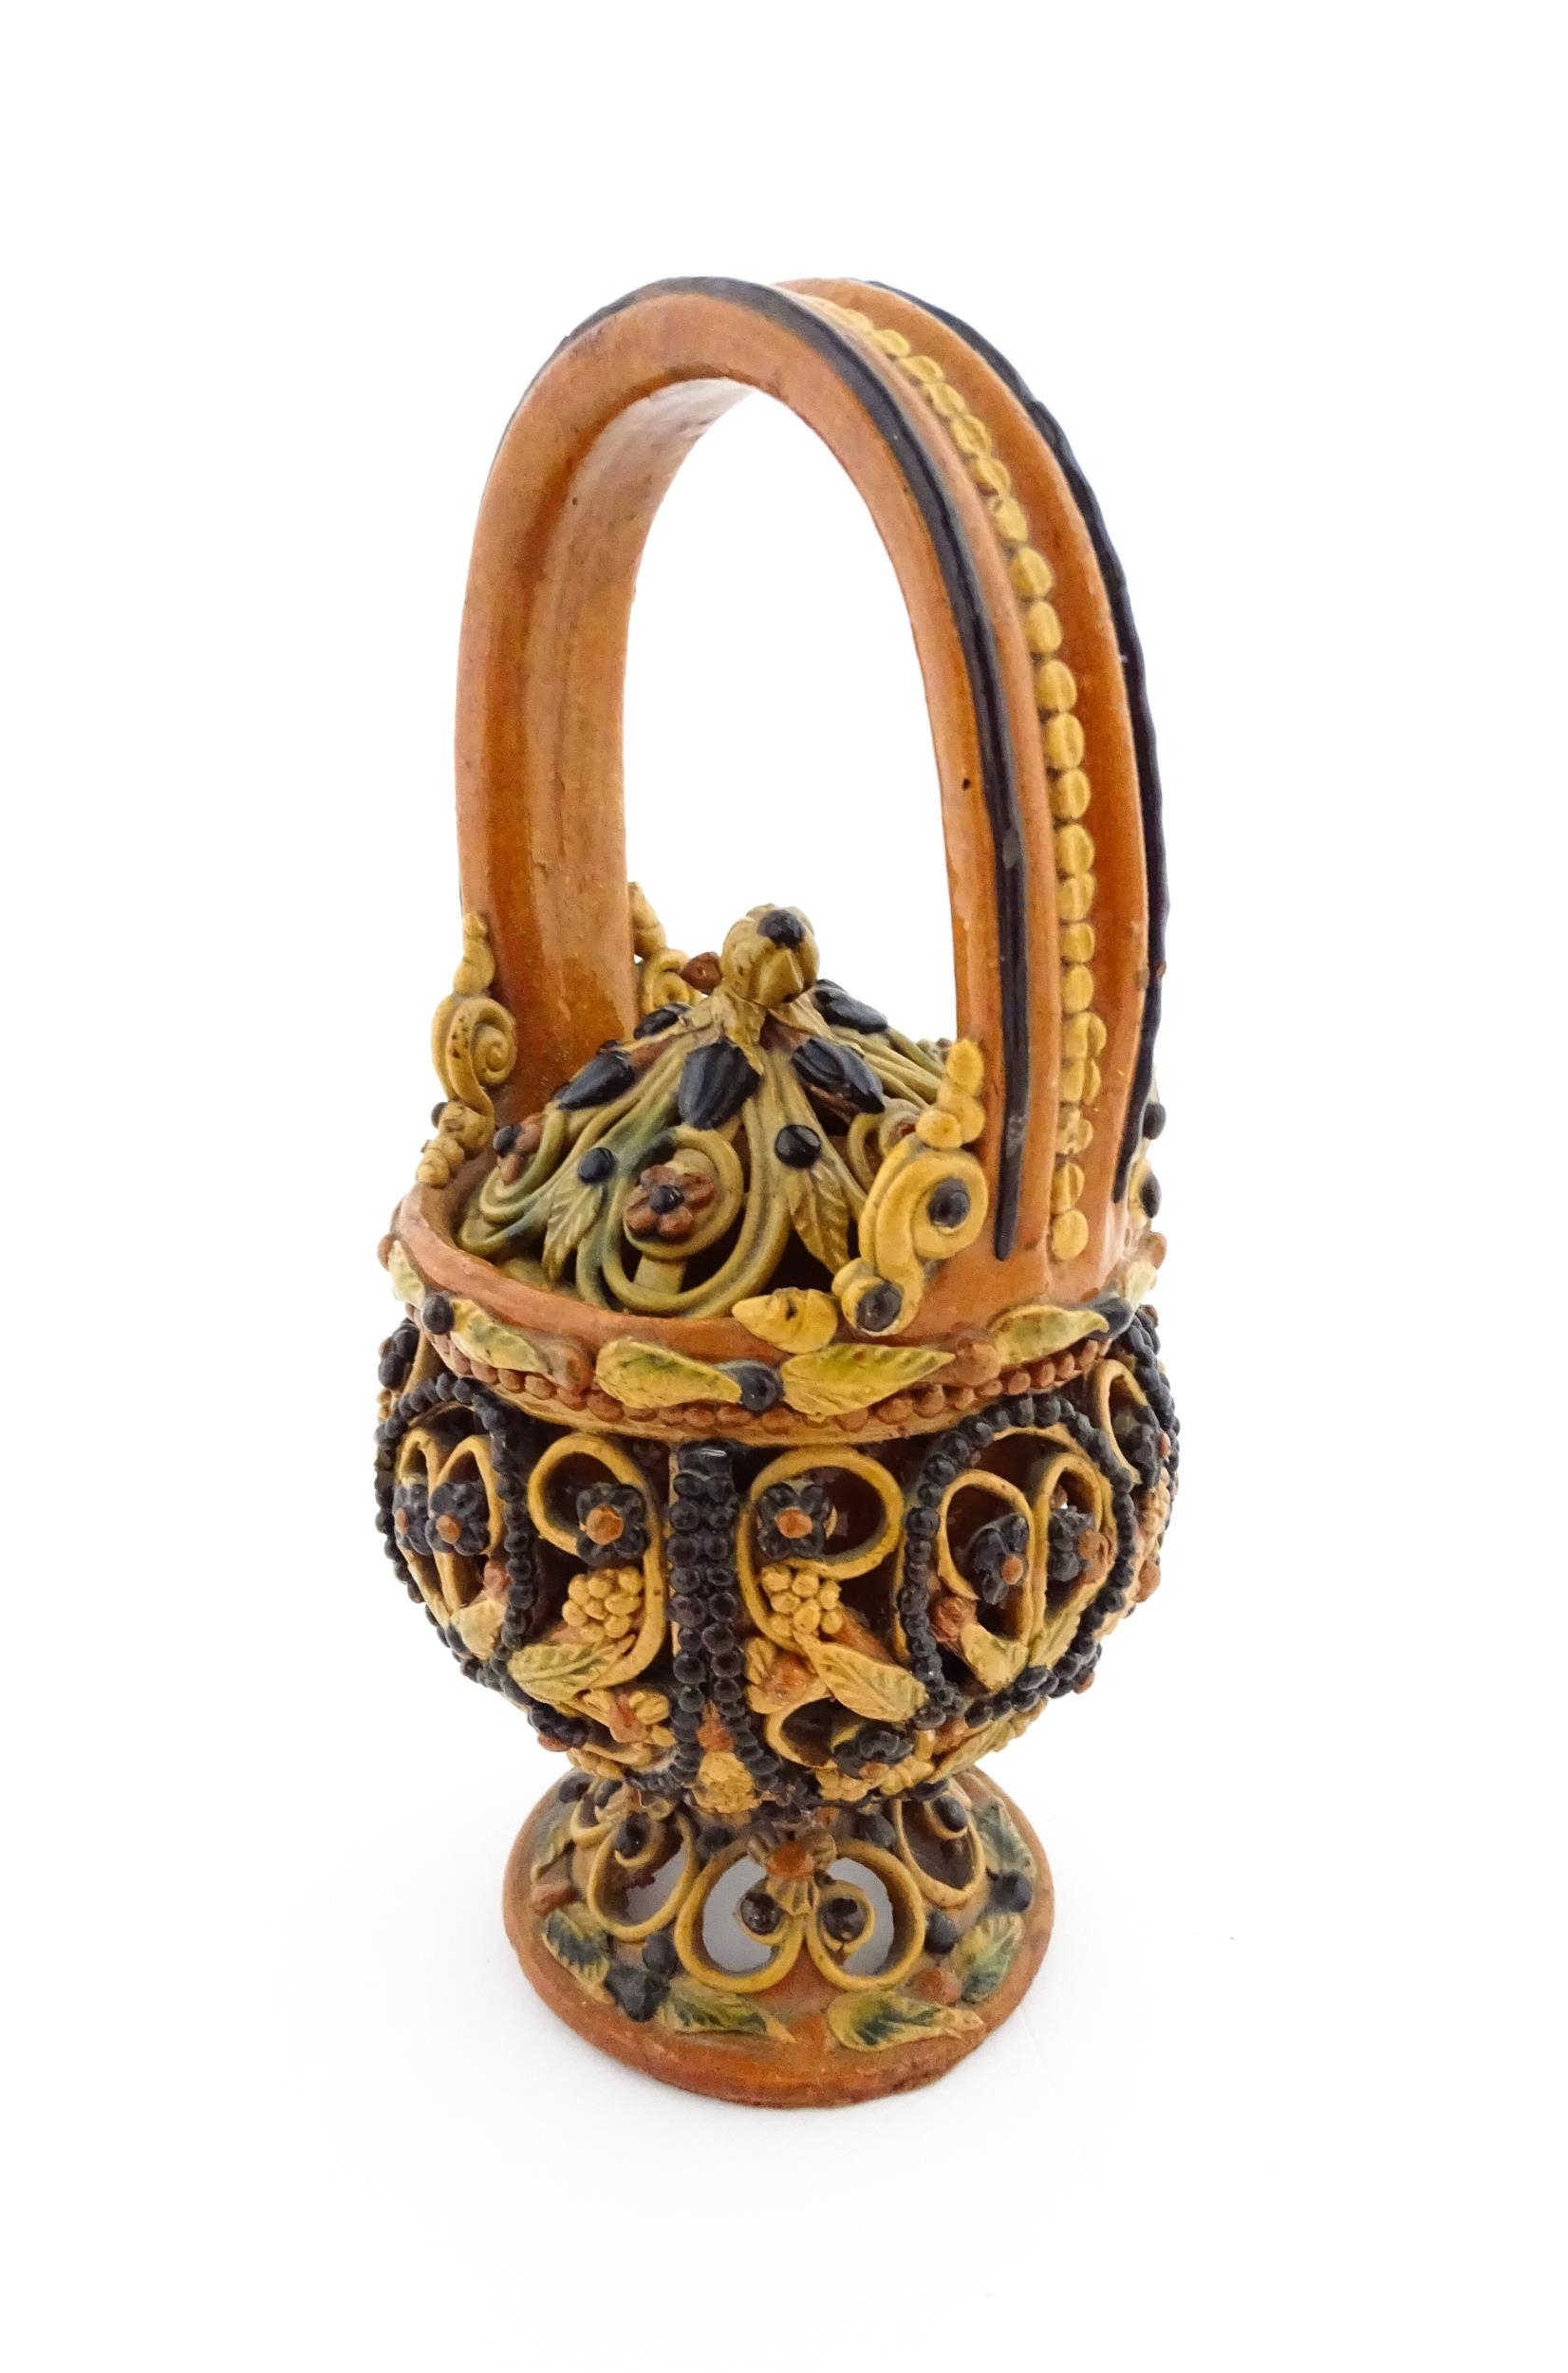 A Continental earthenware fire / charcoal basket in the Flemish style / pot pourri with openwork - Image 3 of 6